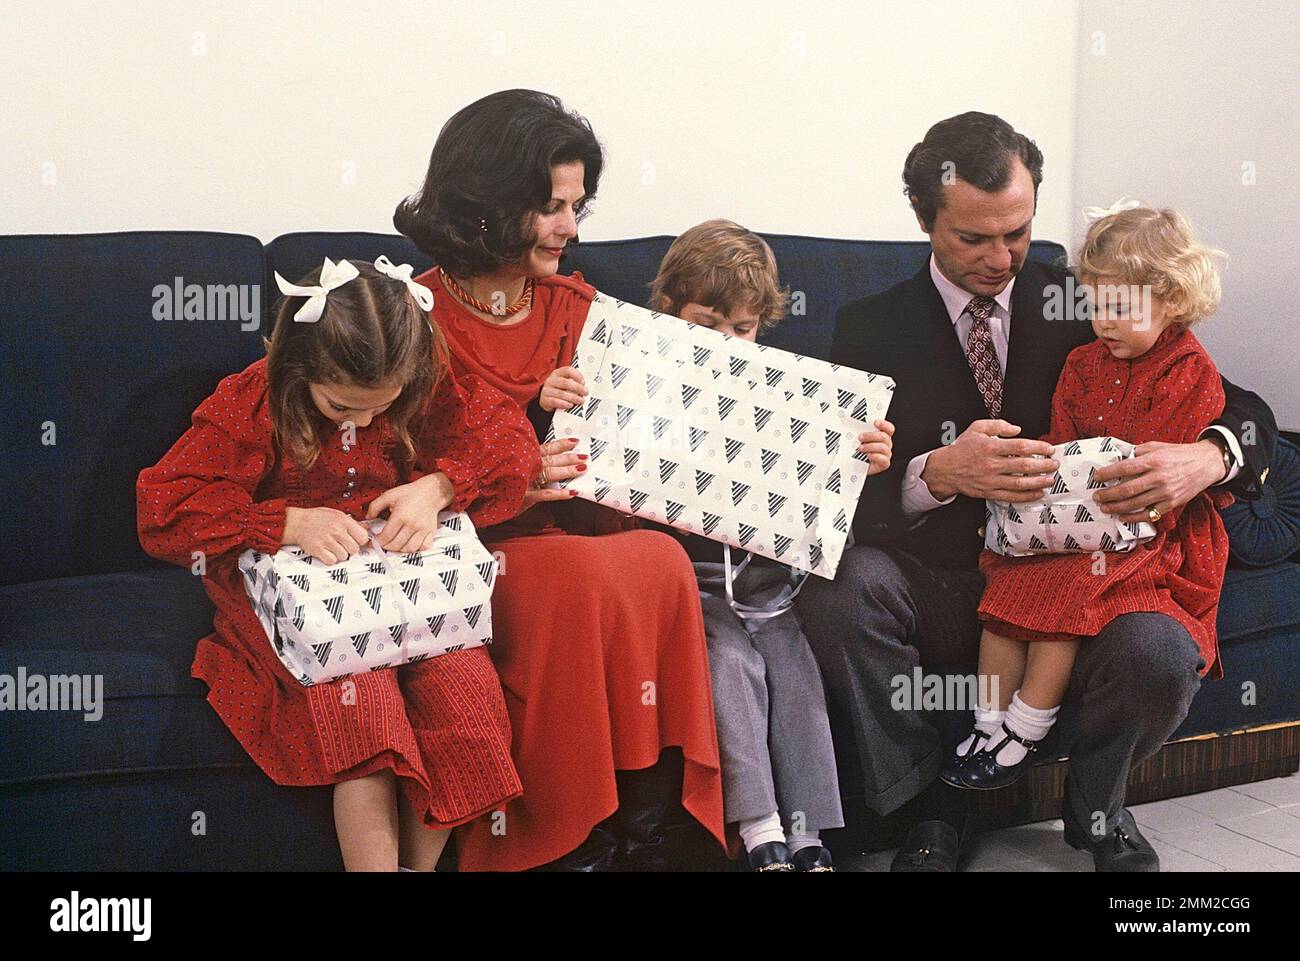 Carl XVI Gustaf, King of Sweden. Born 30 april 1946.  The King Carl XVI Gustaf, Queen Silvia their children, princess Madeleine, crown princess Victoria, prince Carl Philip, during the annual christmas photo session. Stock Photo